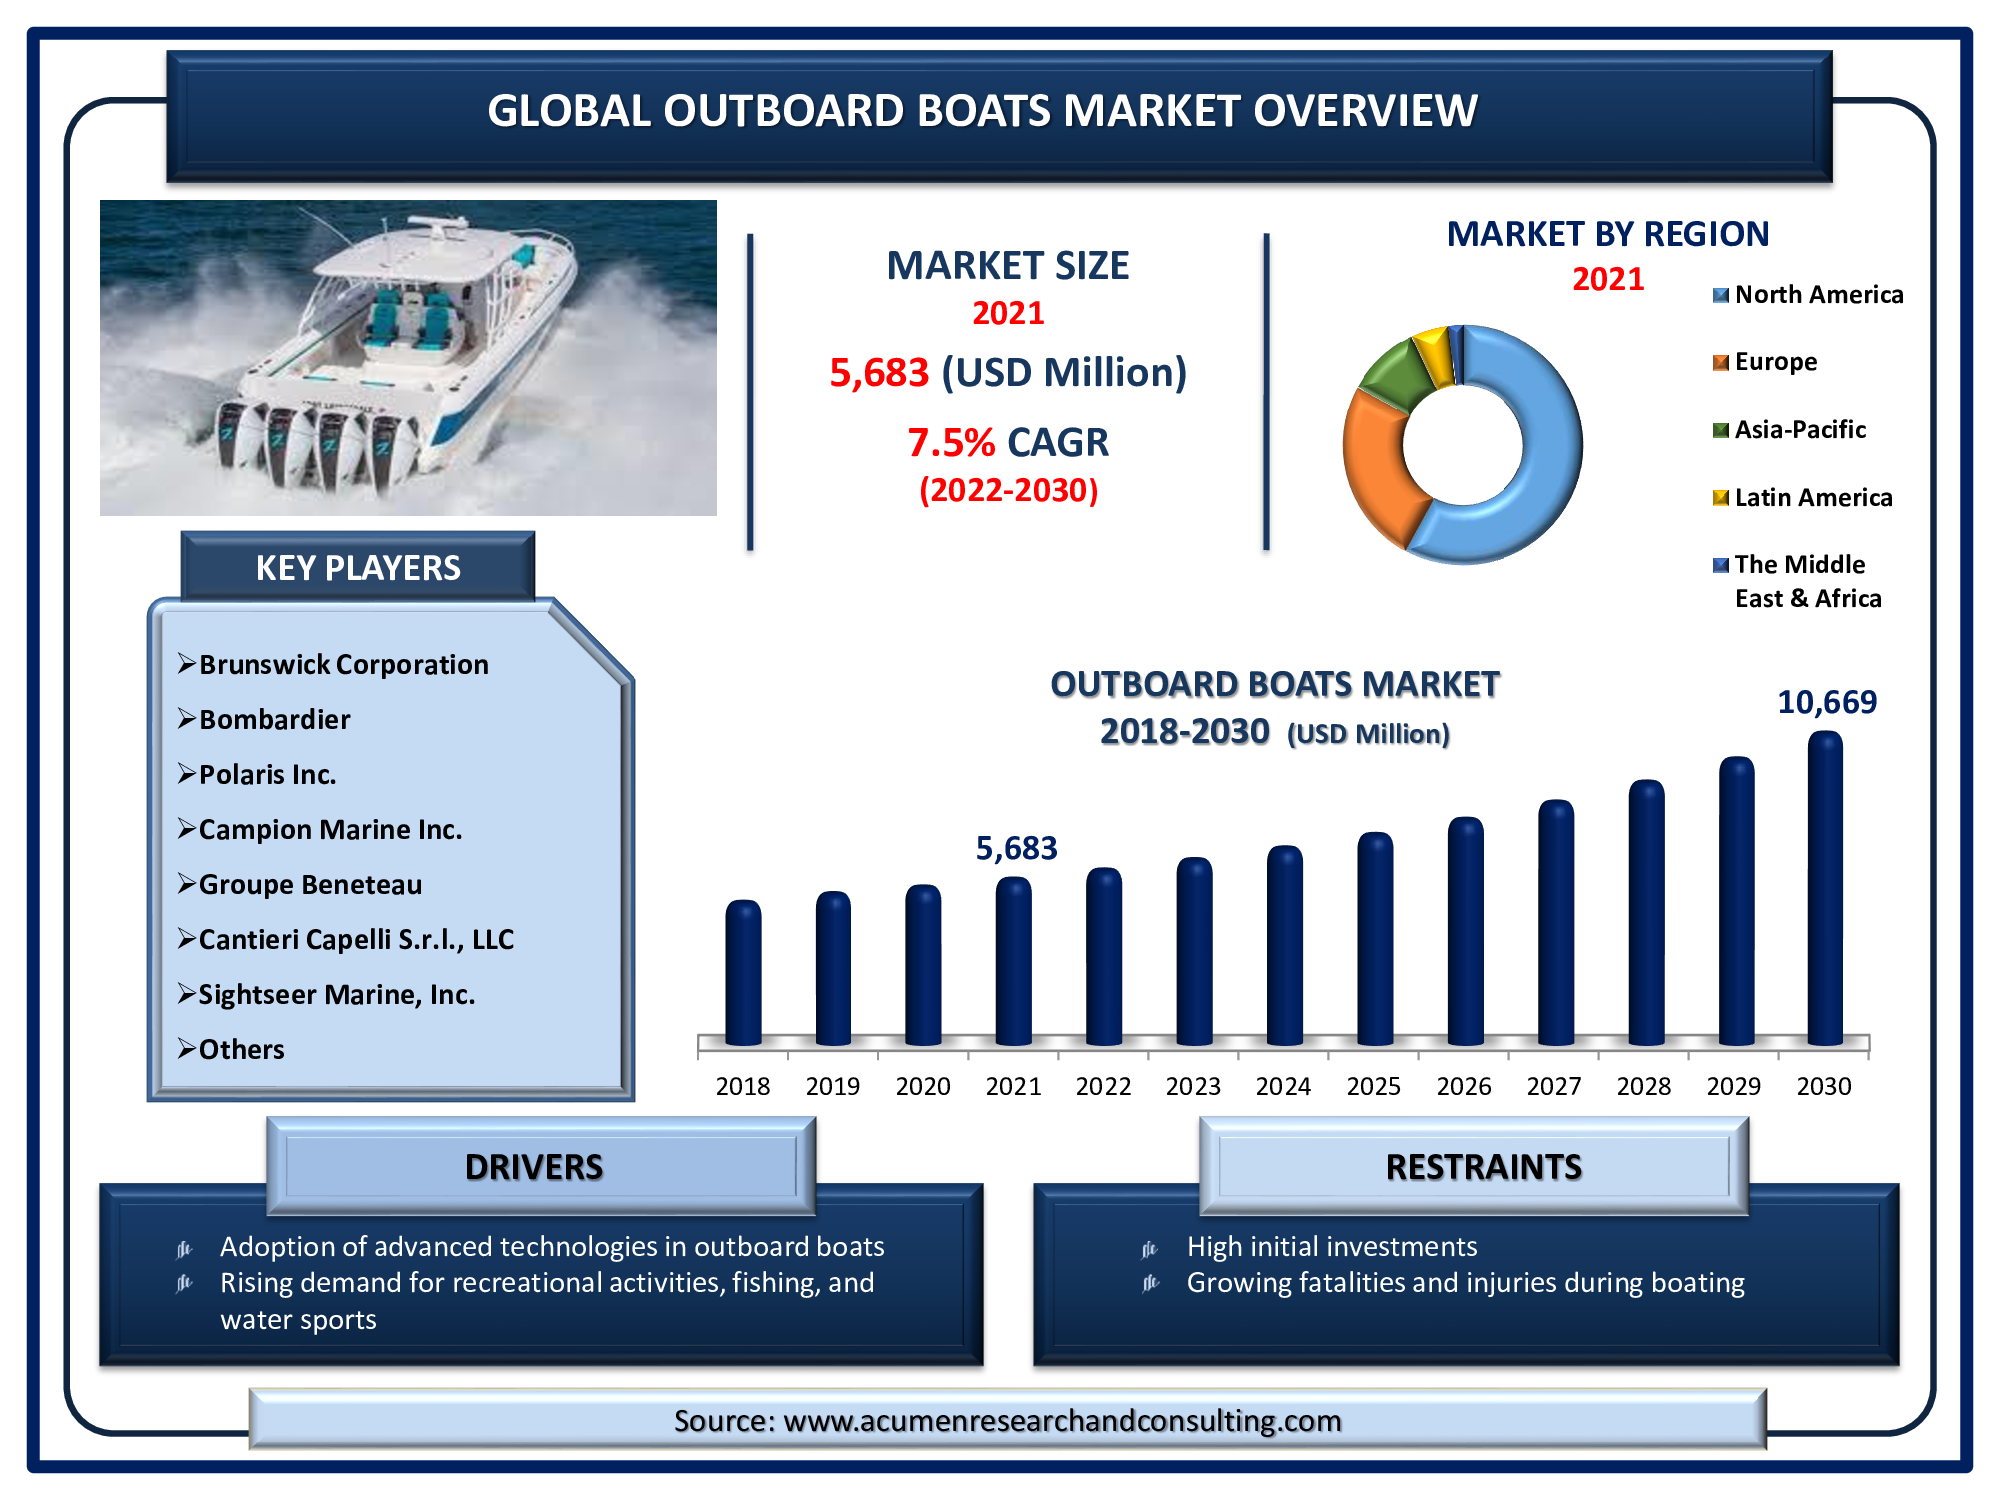 Outboard Boats Market is estimated to reach USD 10,669 Million by 2030, with a CAGR of 7.5%